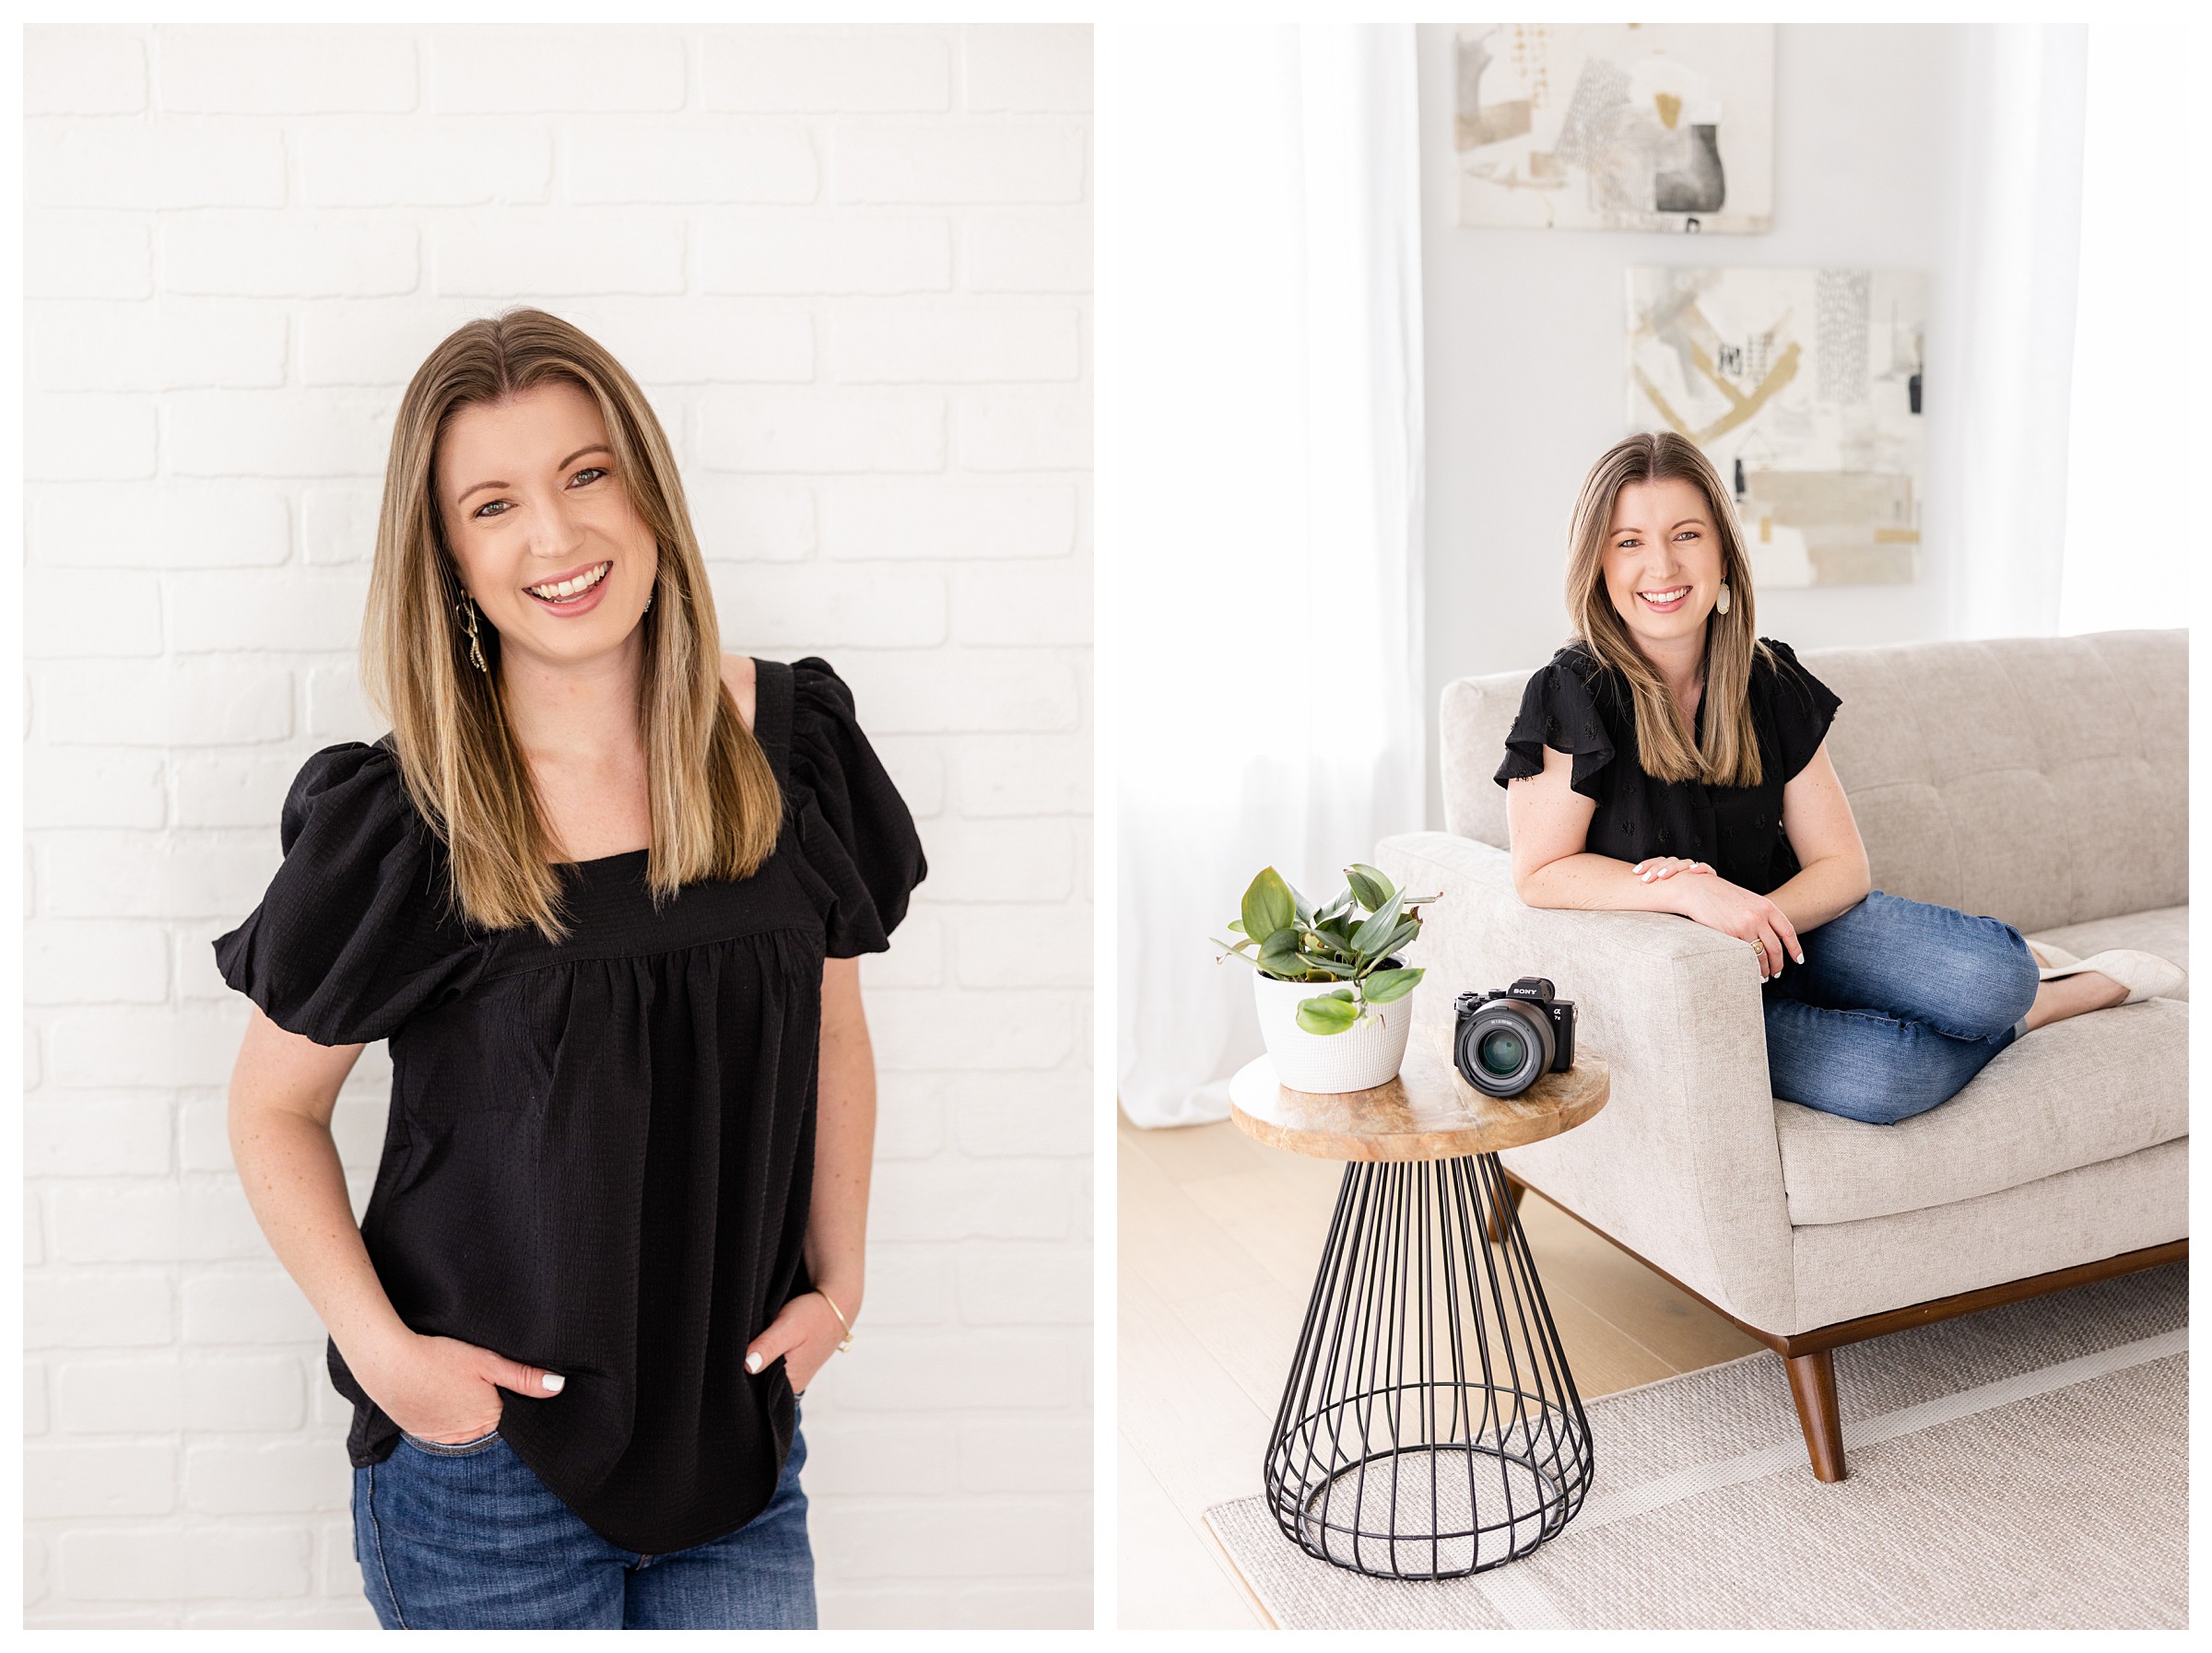 First image is of woman in black shirt and jeans smiling with hands in pockets in front of a while brick wall at 201 Lofthaus and second image is girl sitting on couch with legs up and leaning on arm rest with camera on side table